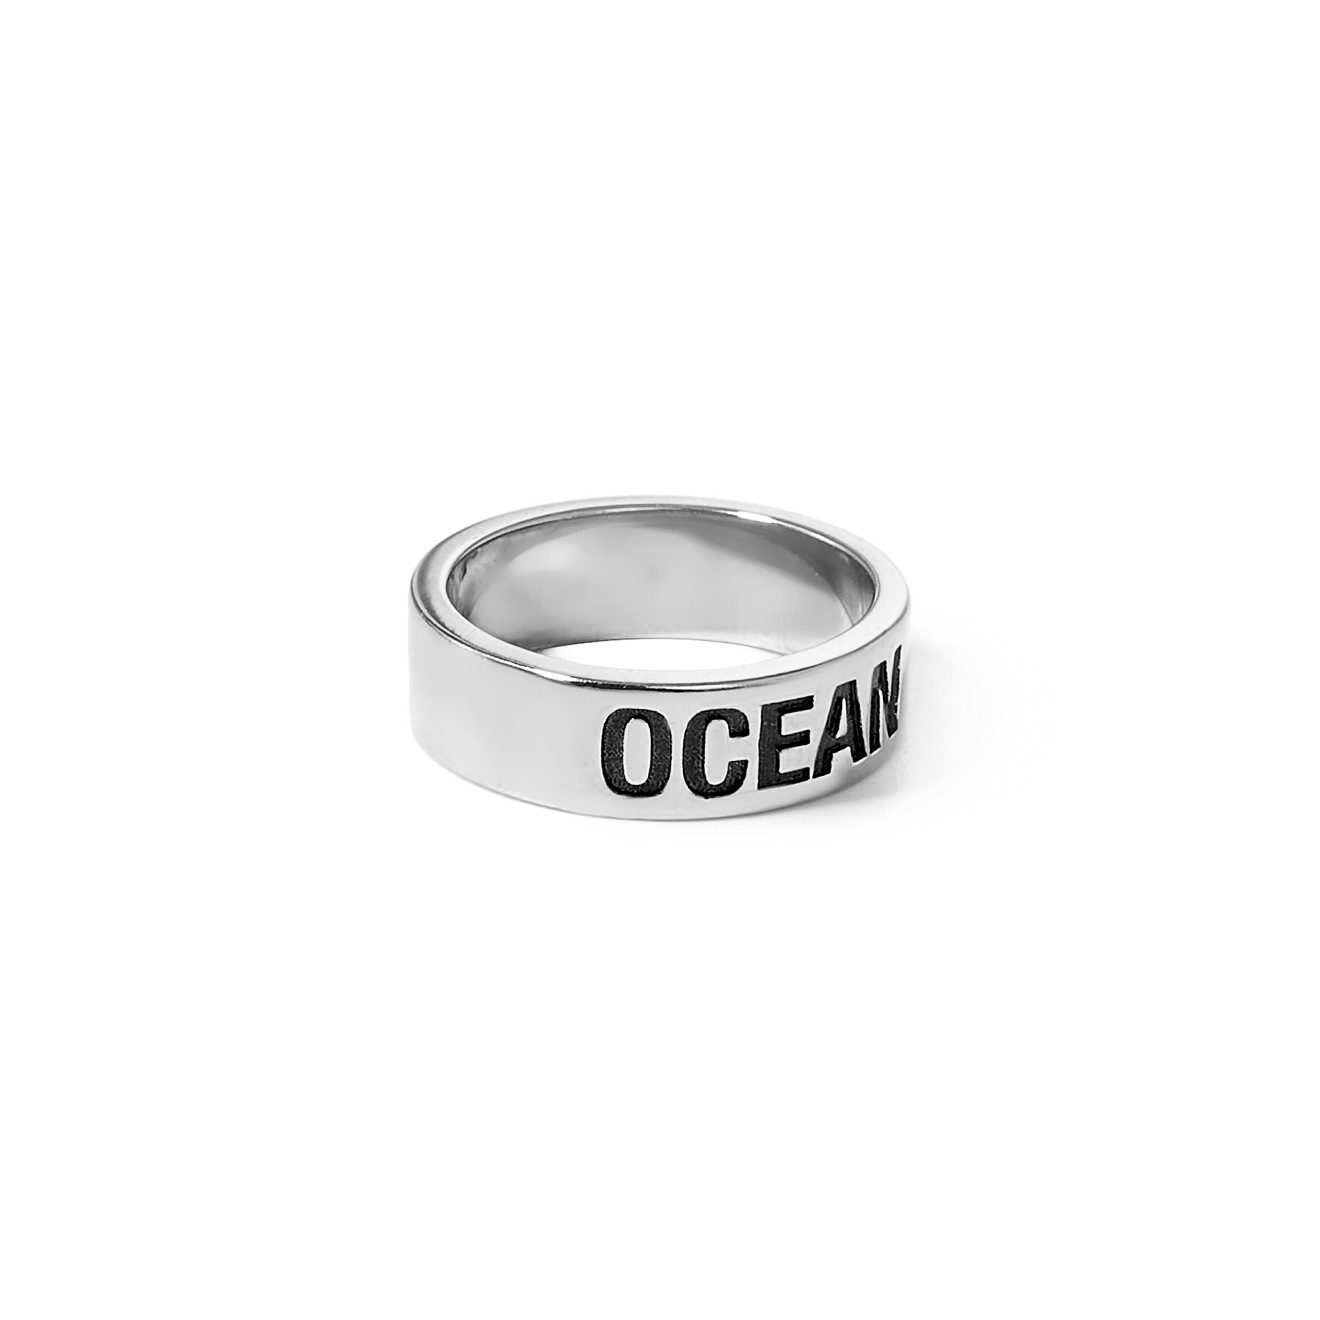 Waves and Gems Кольцо с надписью «OCEAN» waves and gems кольцо с надписью here now